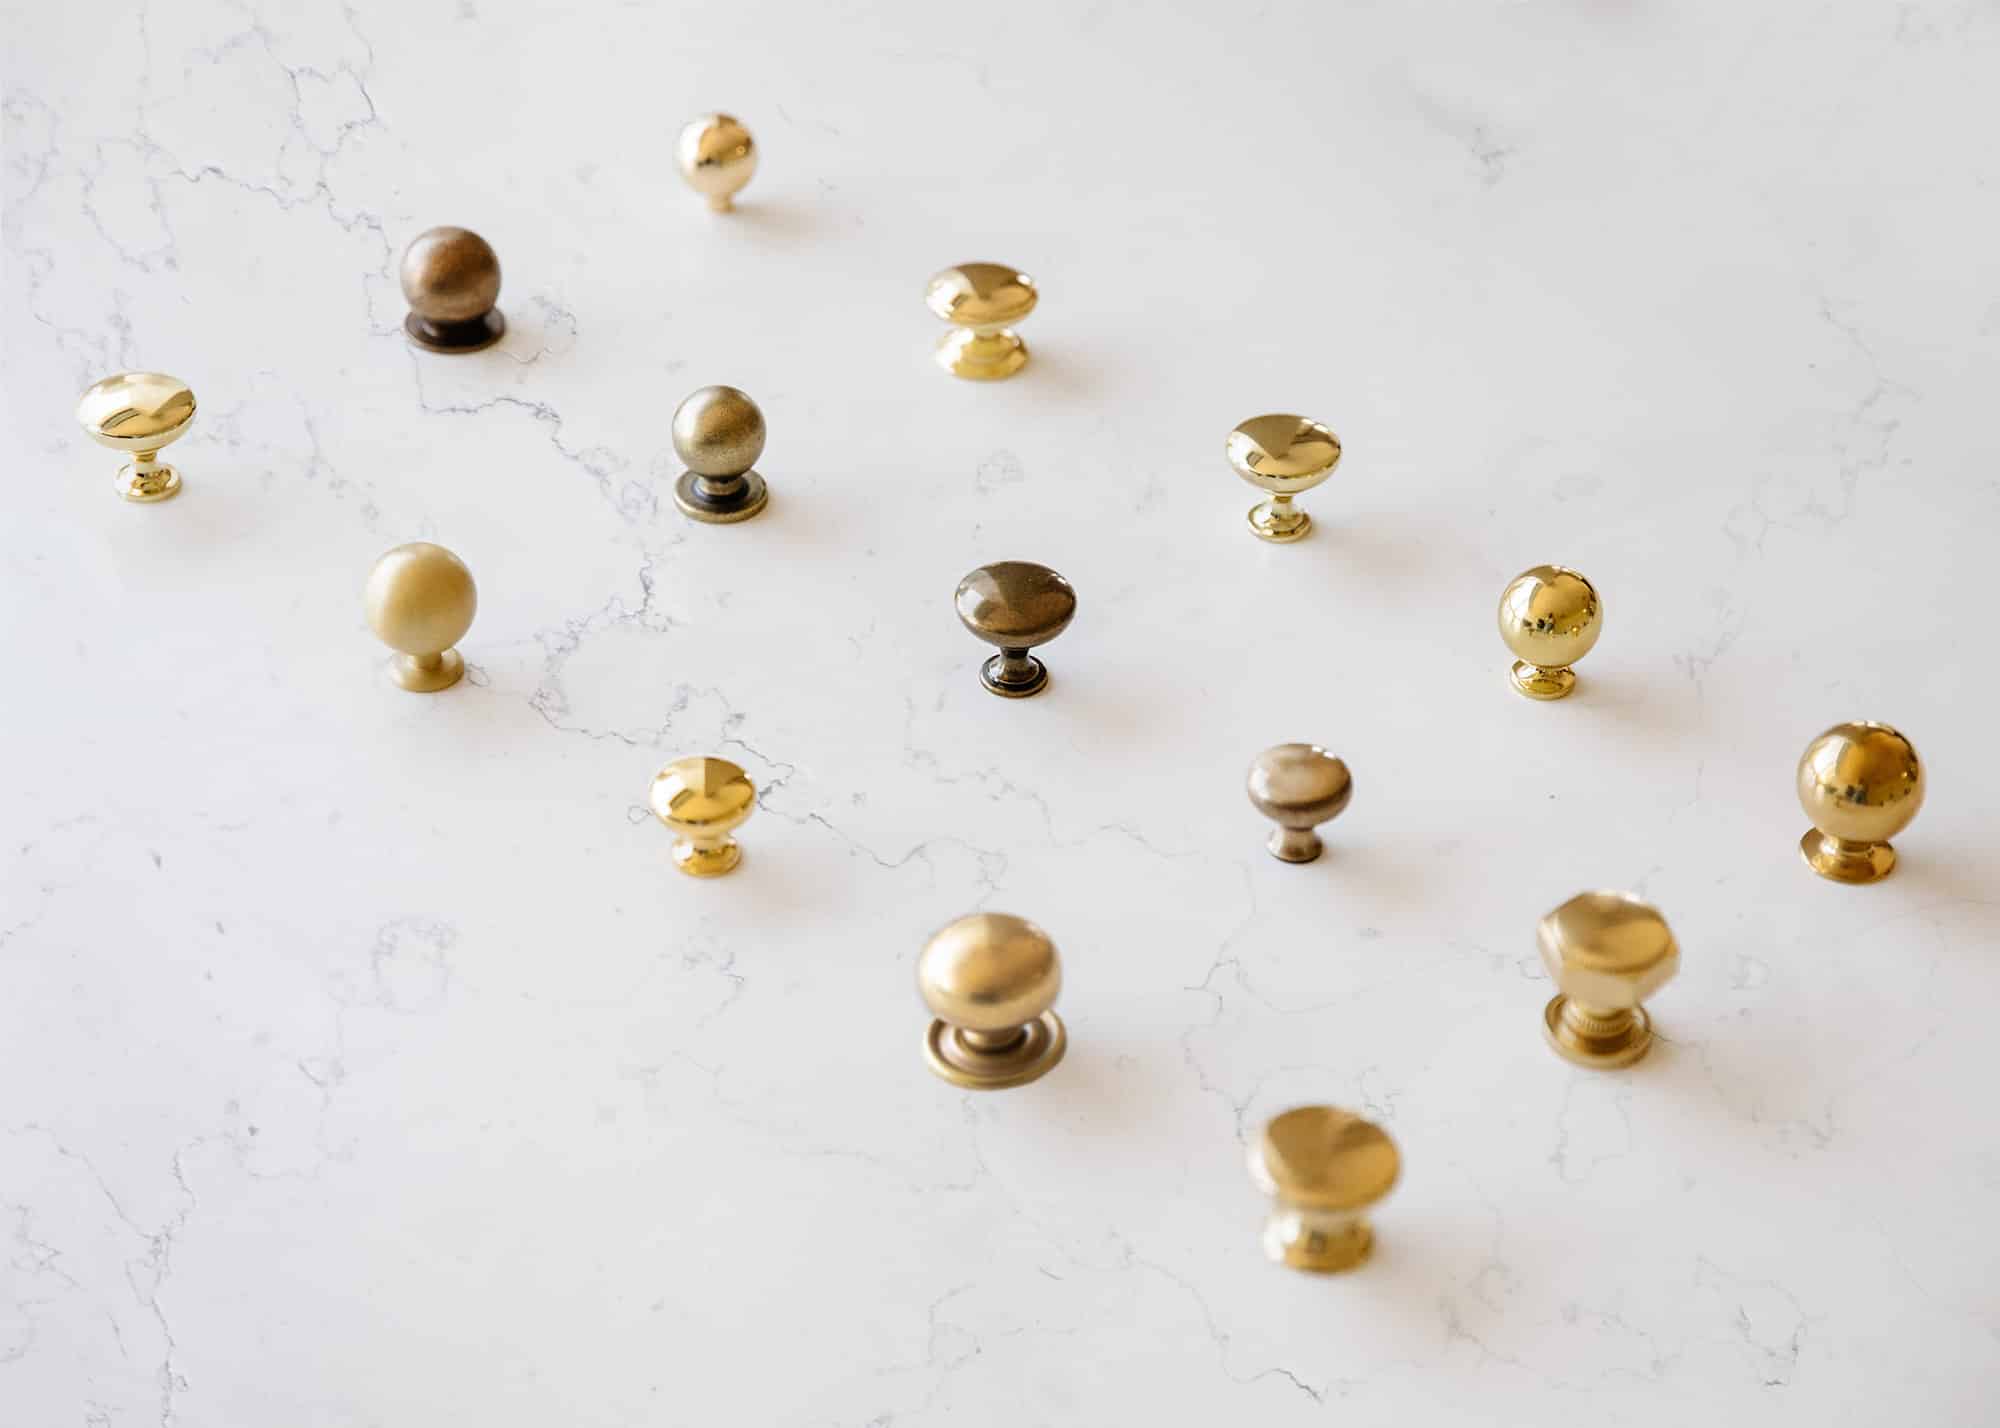 1-1/8 Inch Classic Round Solid Cabinet Knobs, Champagne Gold